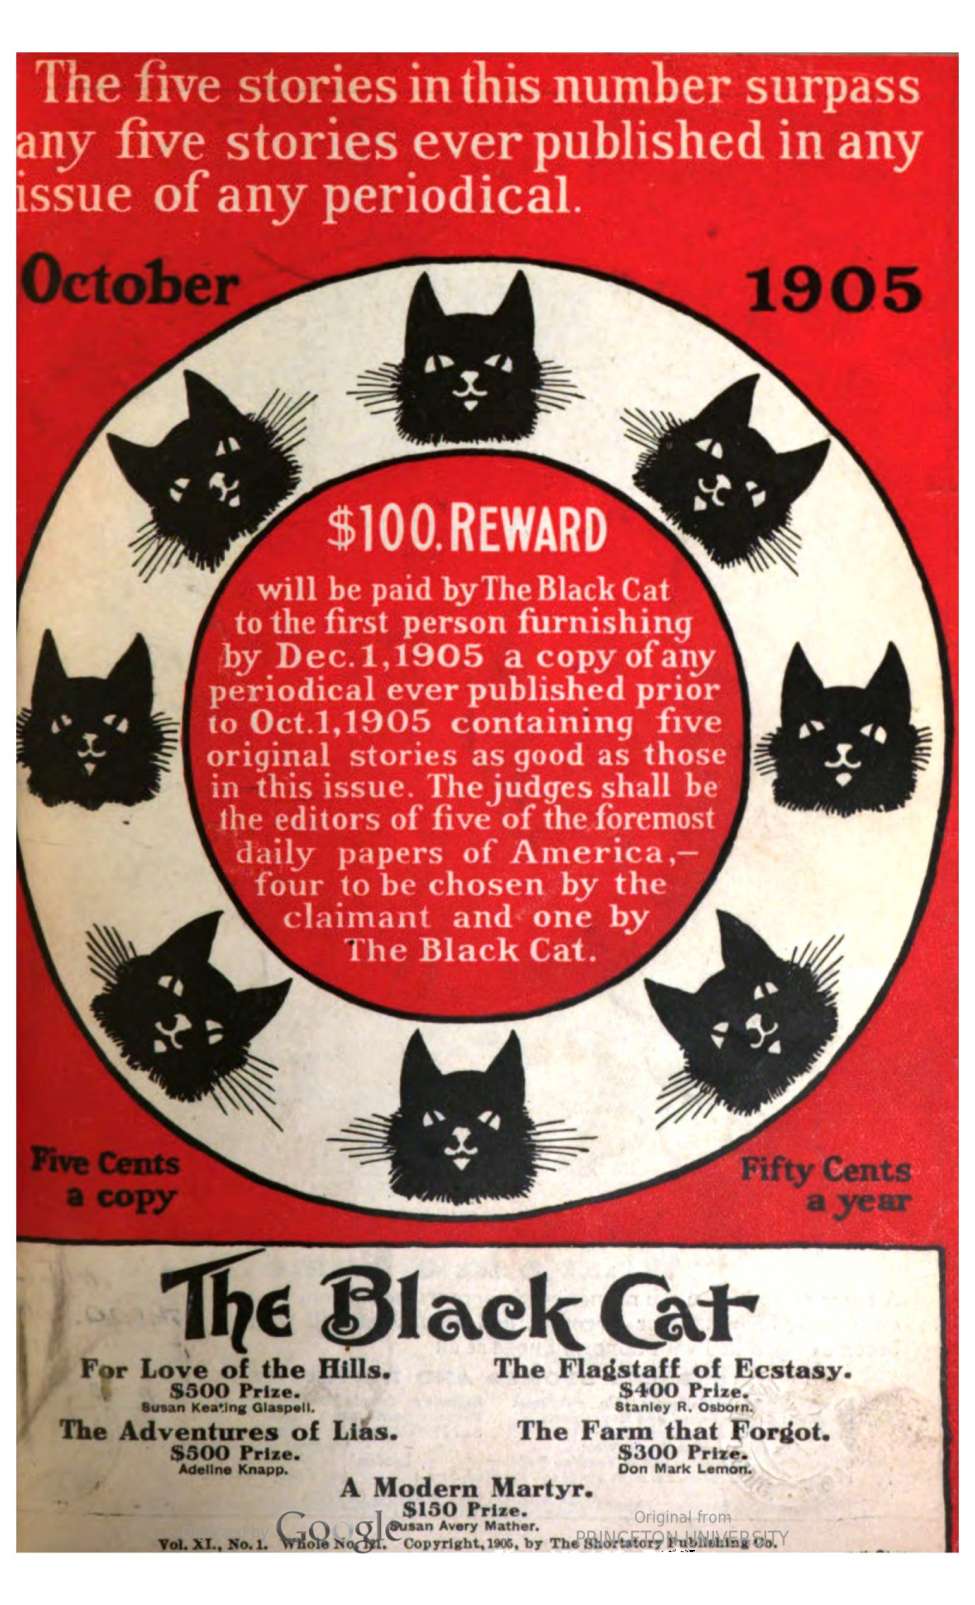 Book Cover For The Black Cat v11 1 - For Love of the Hills - Susan Keating Glaspell